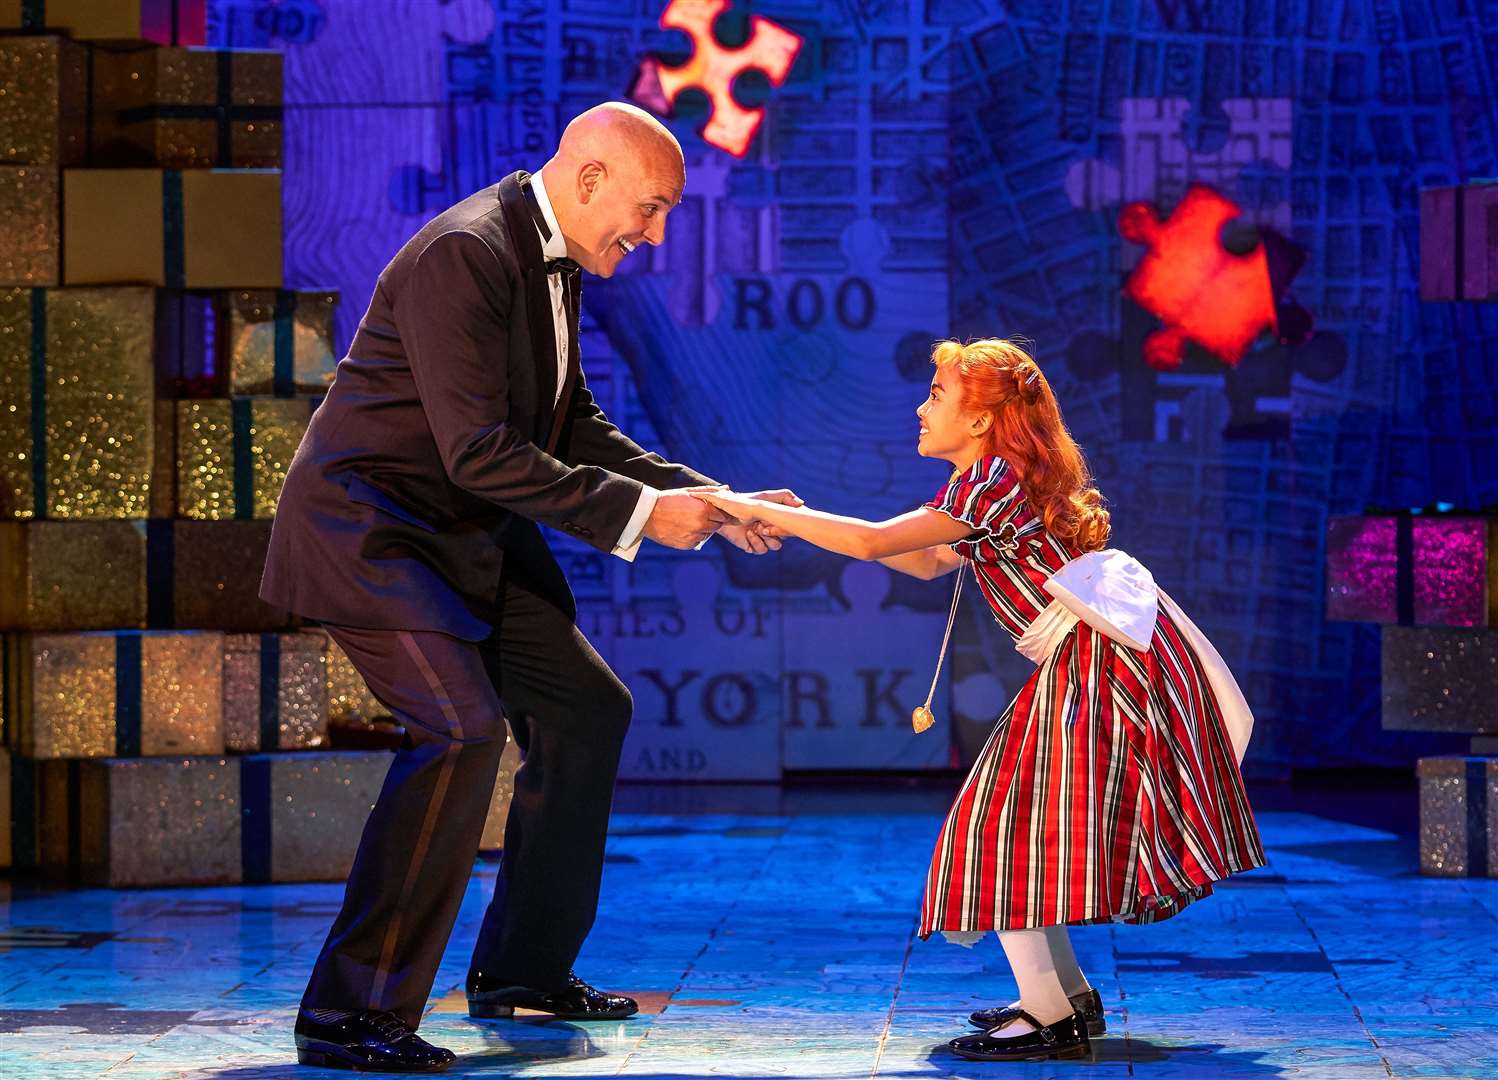 They go together... Annie with Daddy Warbucks